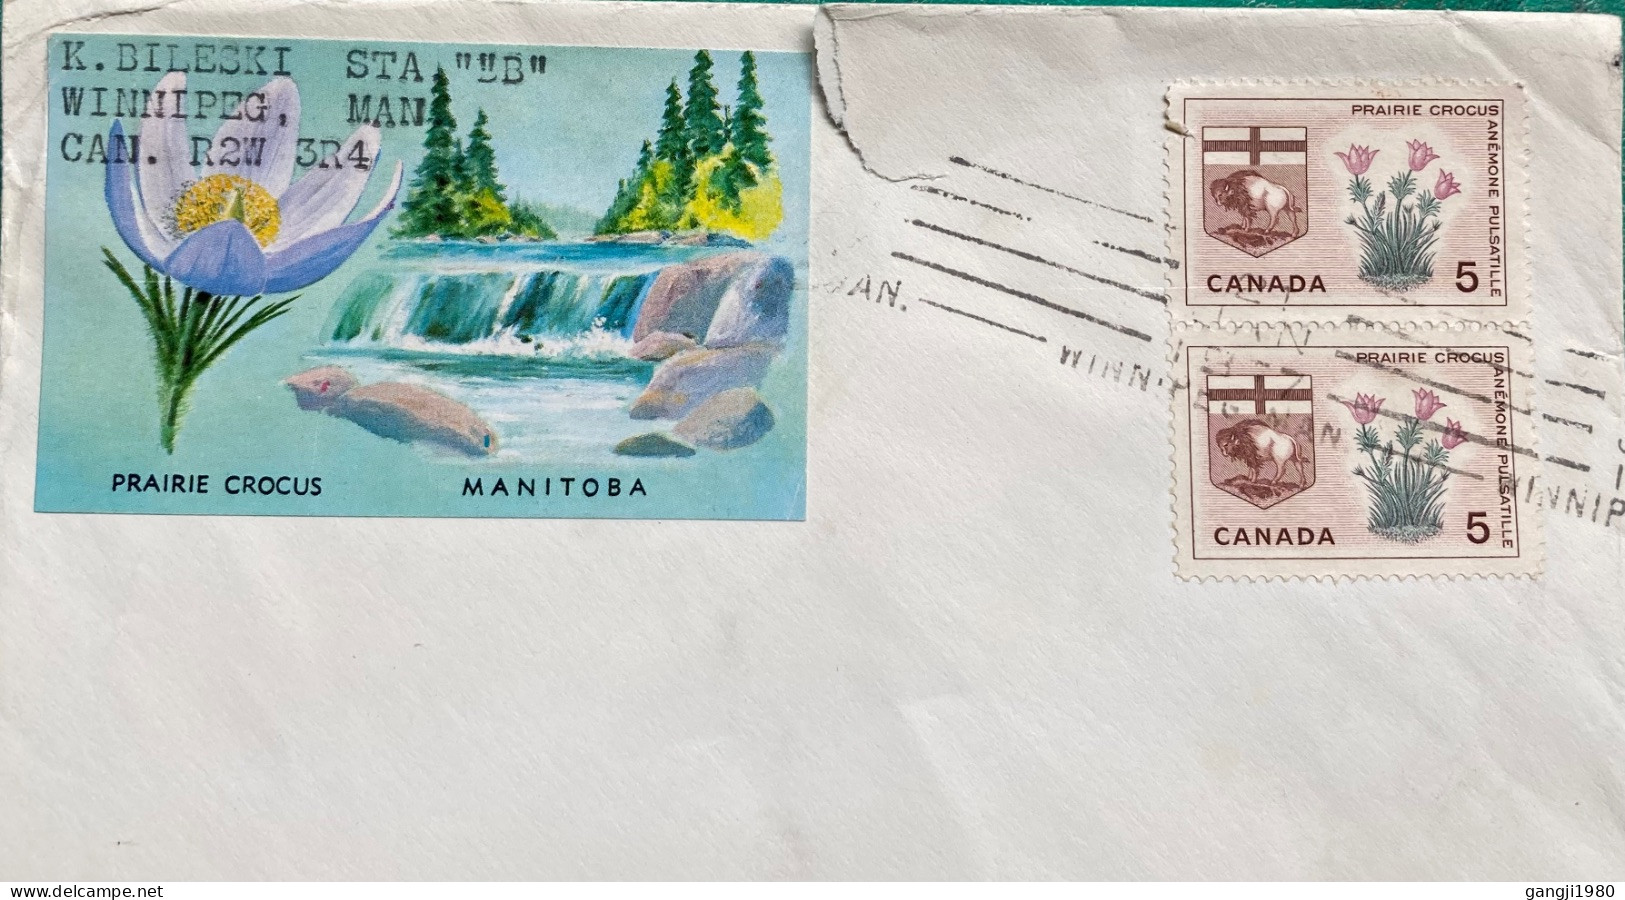 CANADA 1967, COVER USD TO USA, PROVINCE BADLE FLOWER, ANIMAL, NATURE, WATERFALL, 2 STAMP, WINNIPG CITY, BAR CANCEL. - Lettres & Documents